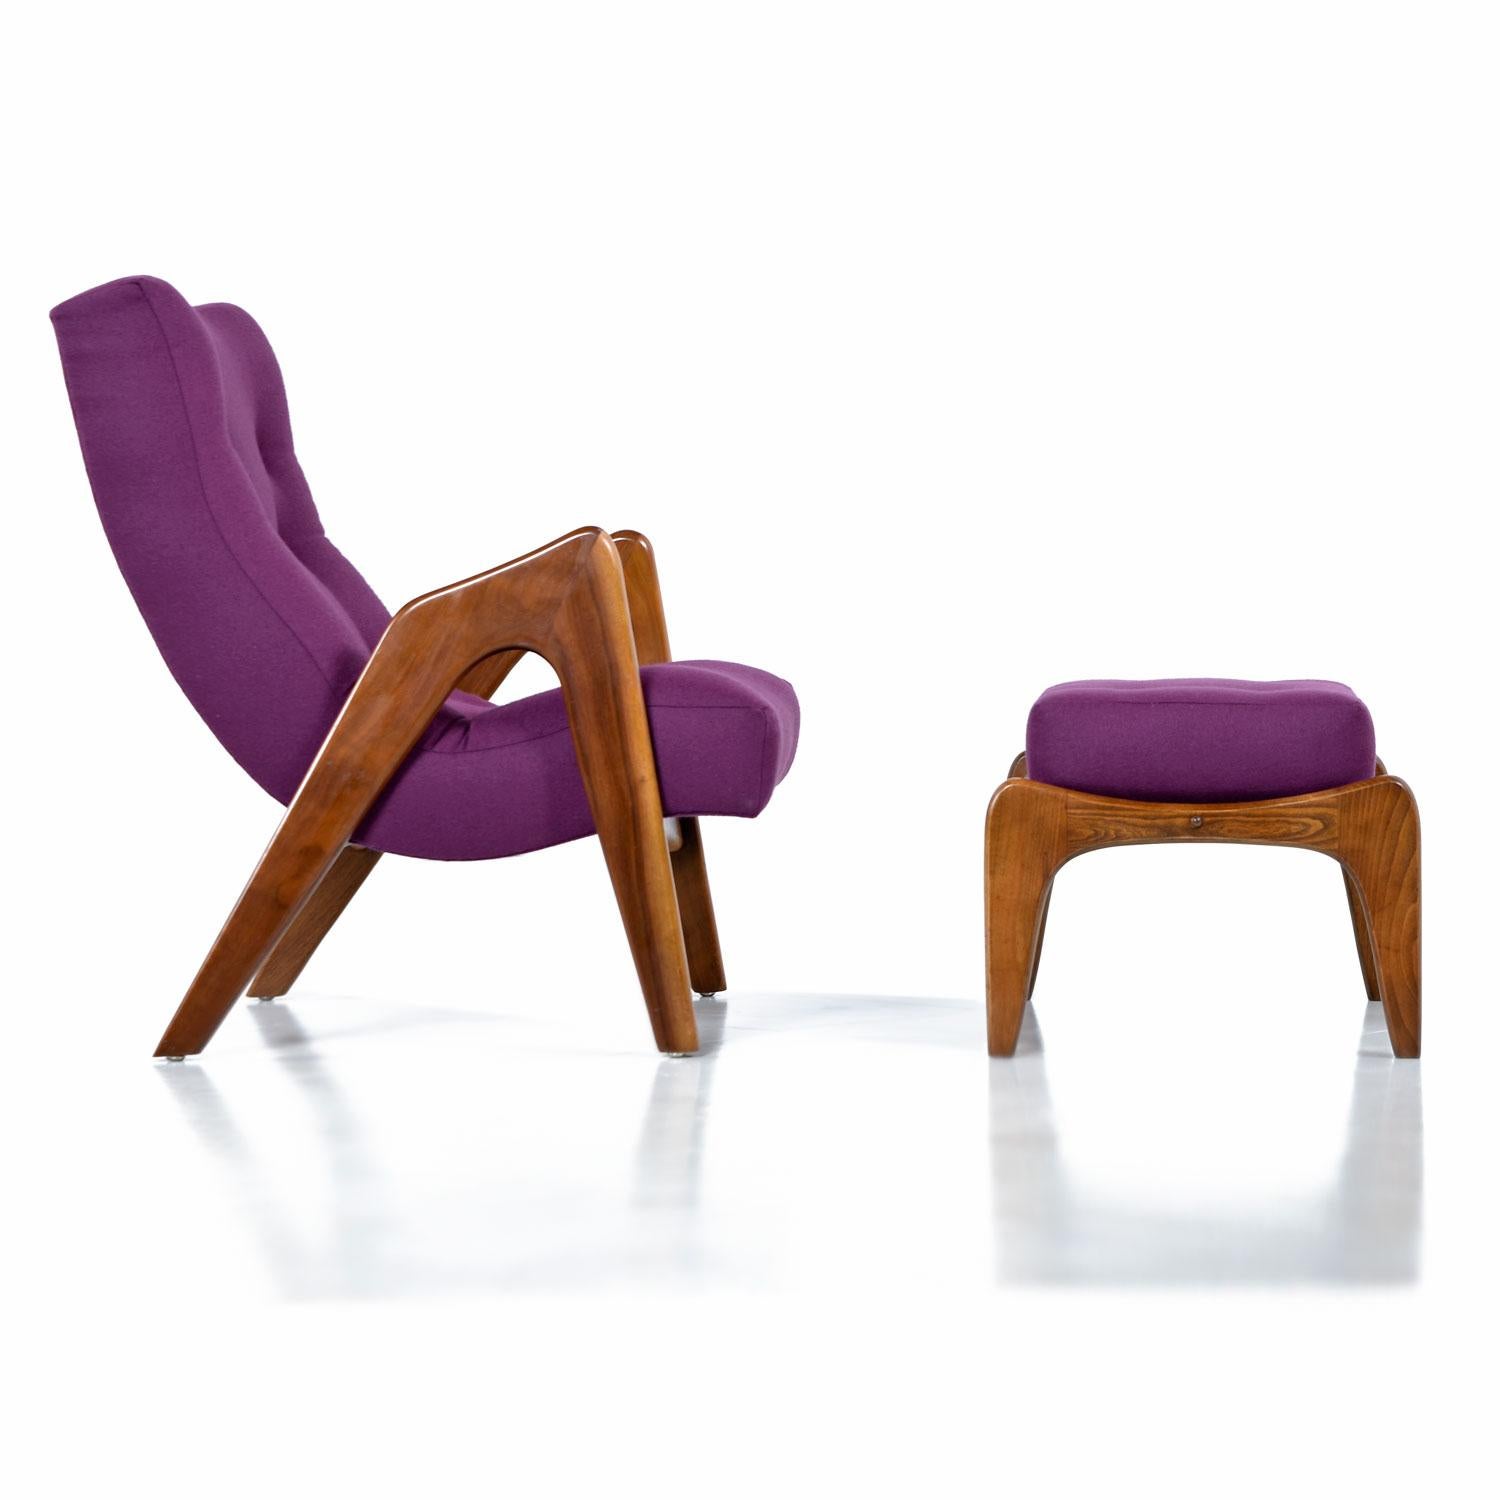 This stunning pair of Adrian Pearsall 705-CW chairs have been lovingly restored. The vintage 1960s 